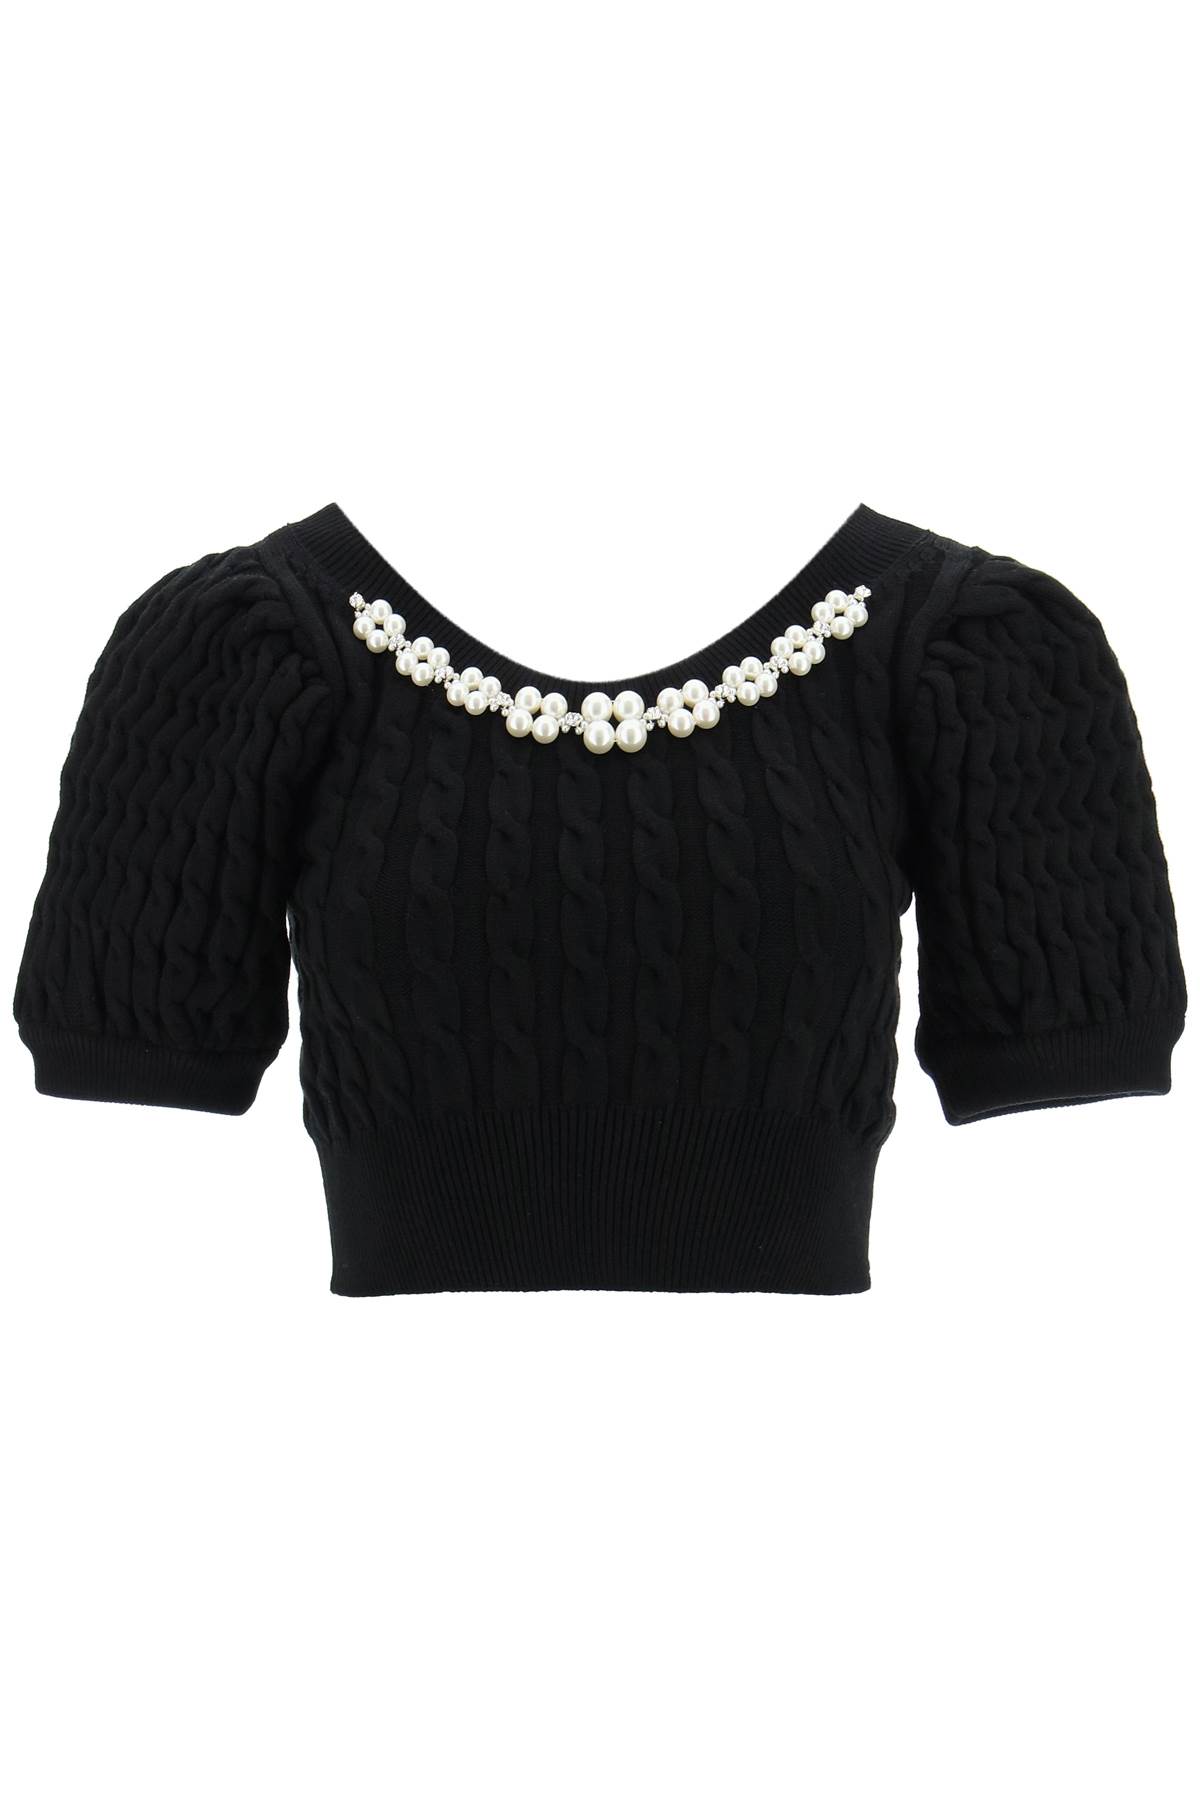 SIMONE ROCHA KNIT CROPPED TOP WITH BEADS